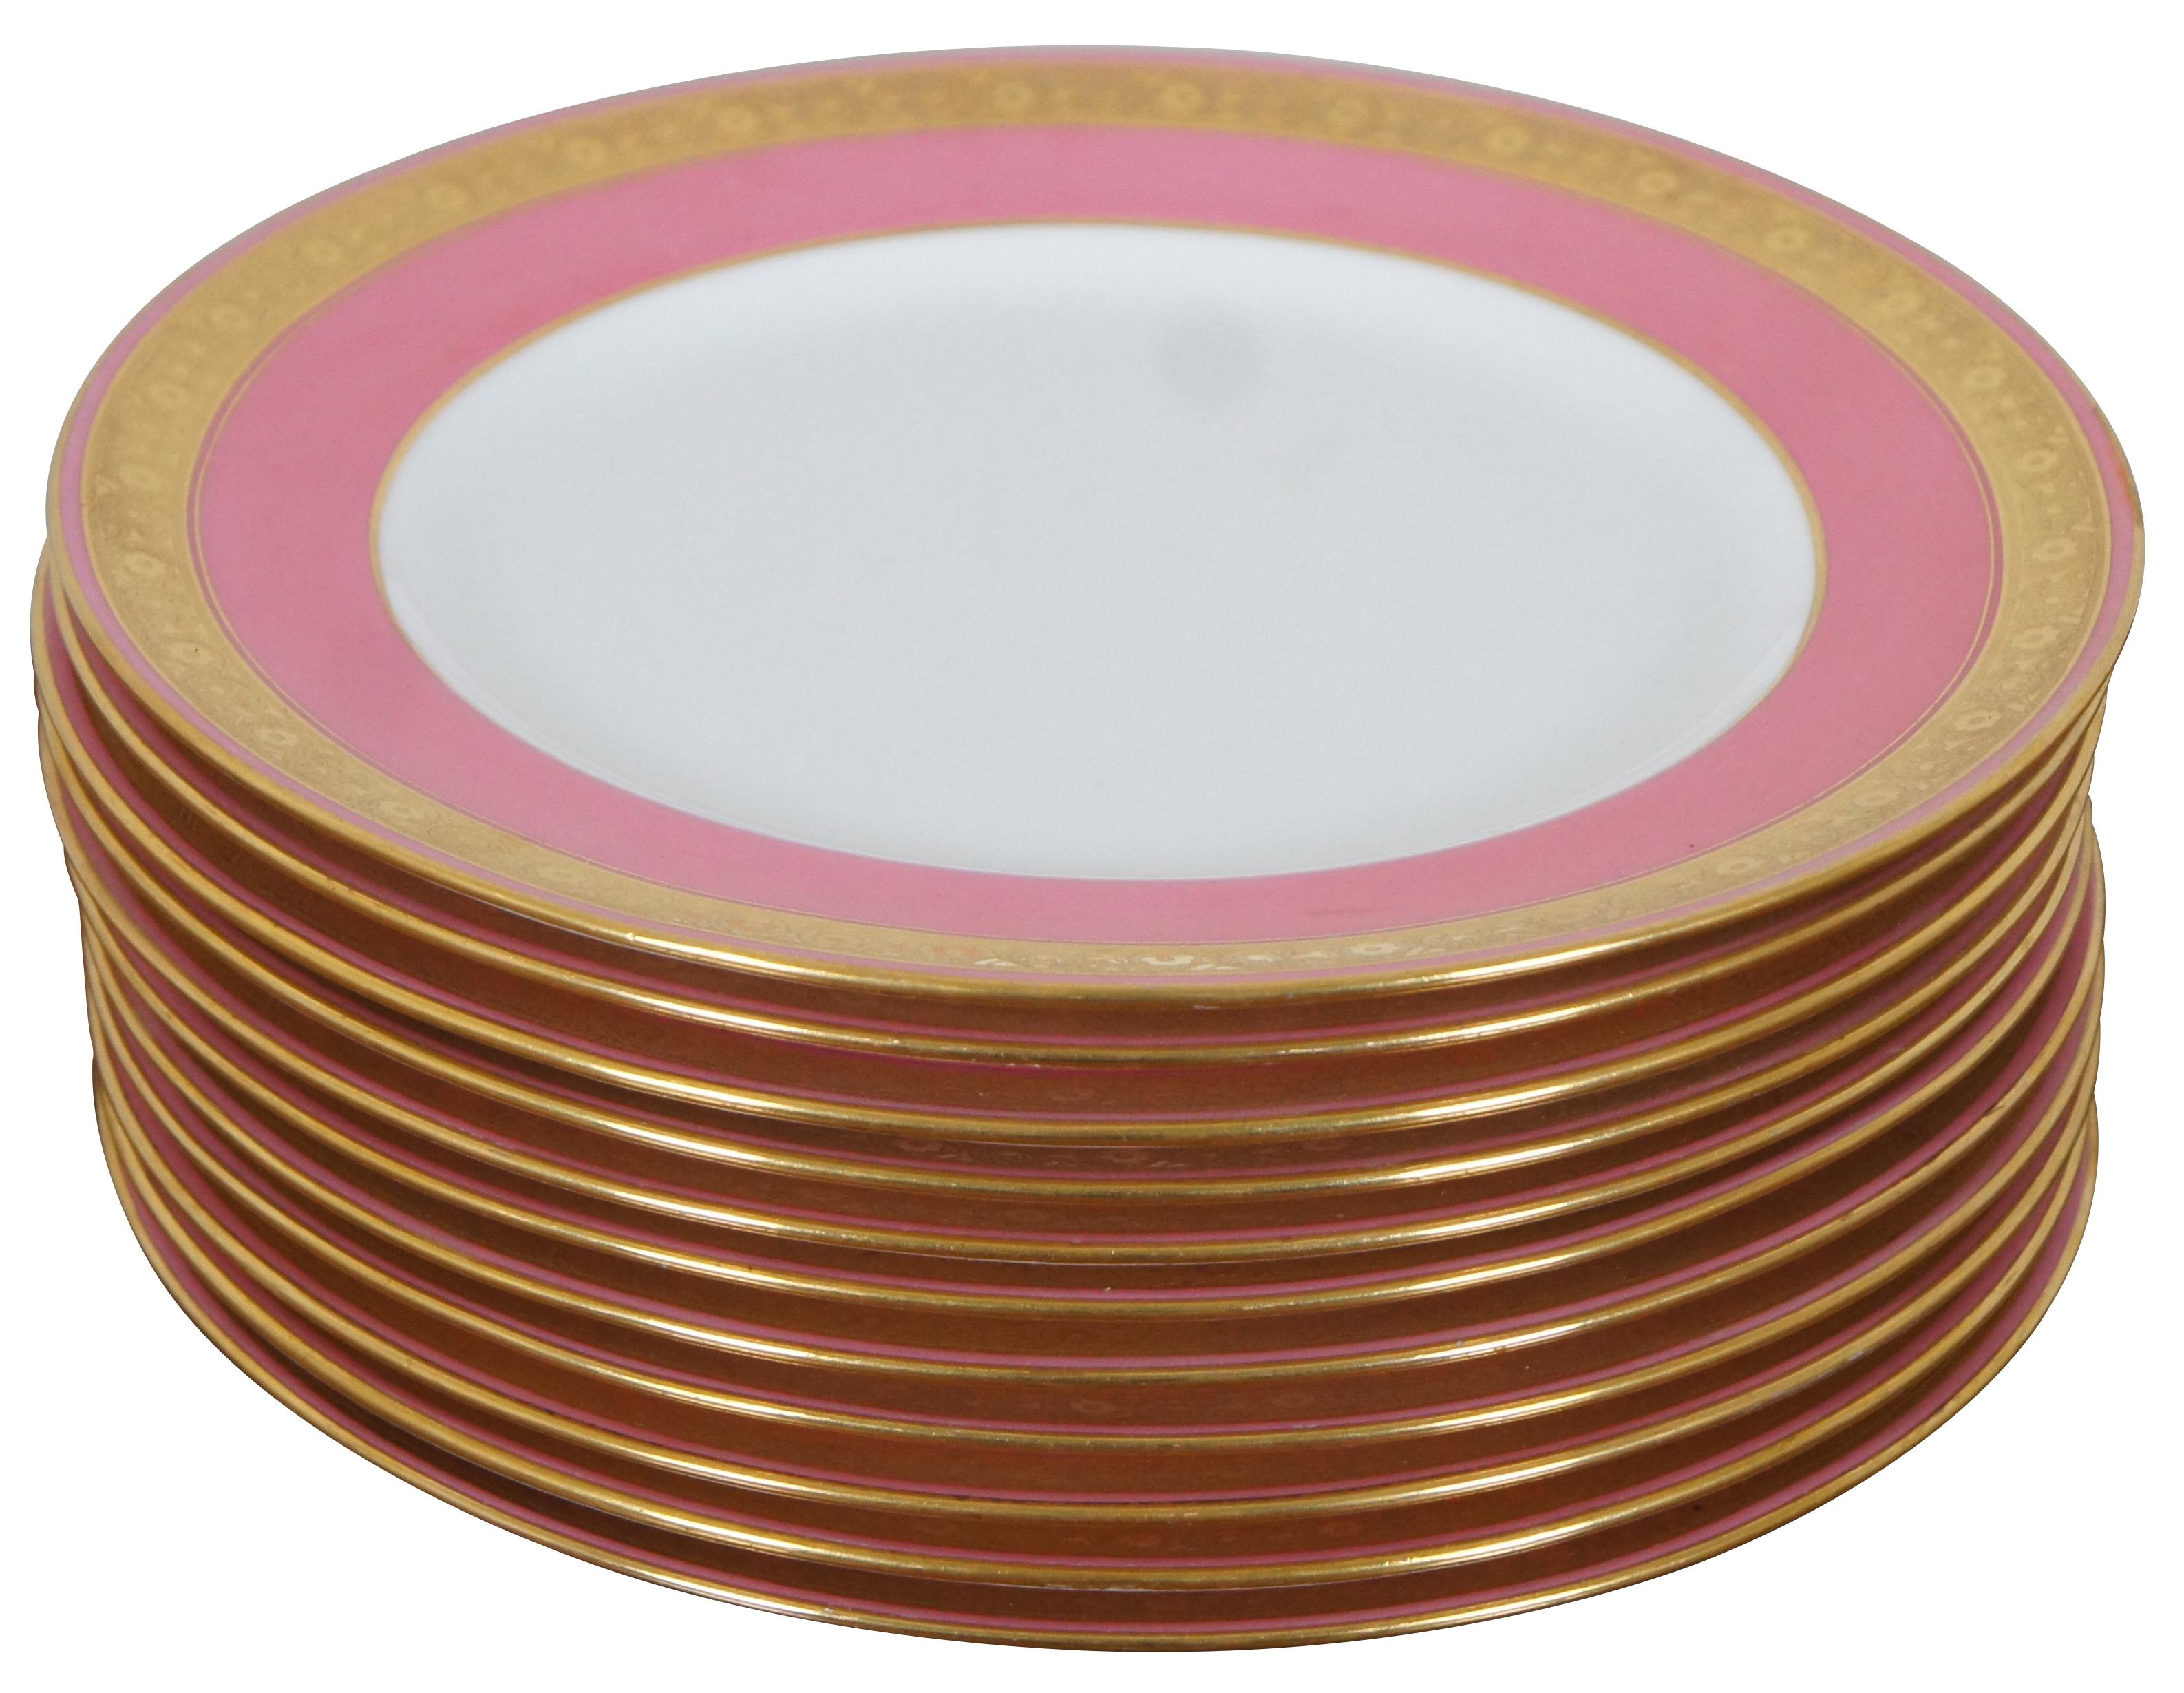 Eleven late 19th to early 20th century Minton / Davis Collamore & Company porcelain china salad plates, featuring broad pink edges with gold encrusted floral bands. Broadway & 21st New York.

